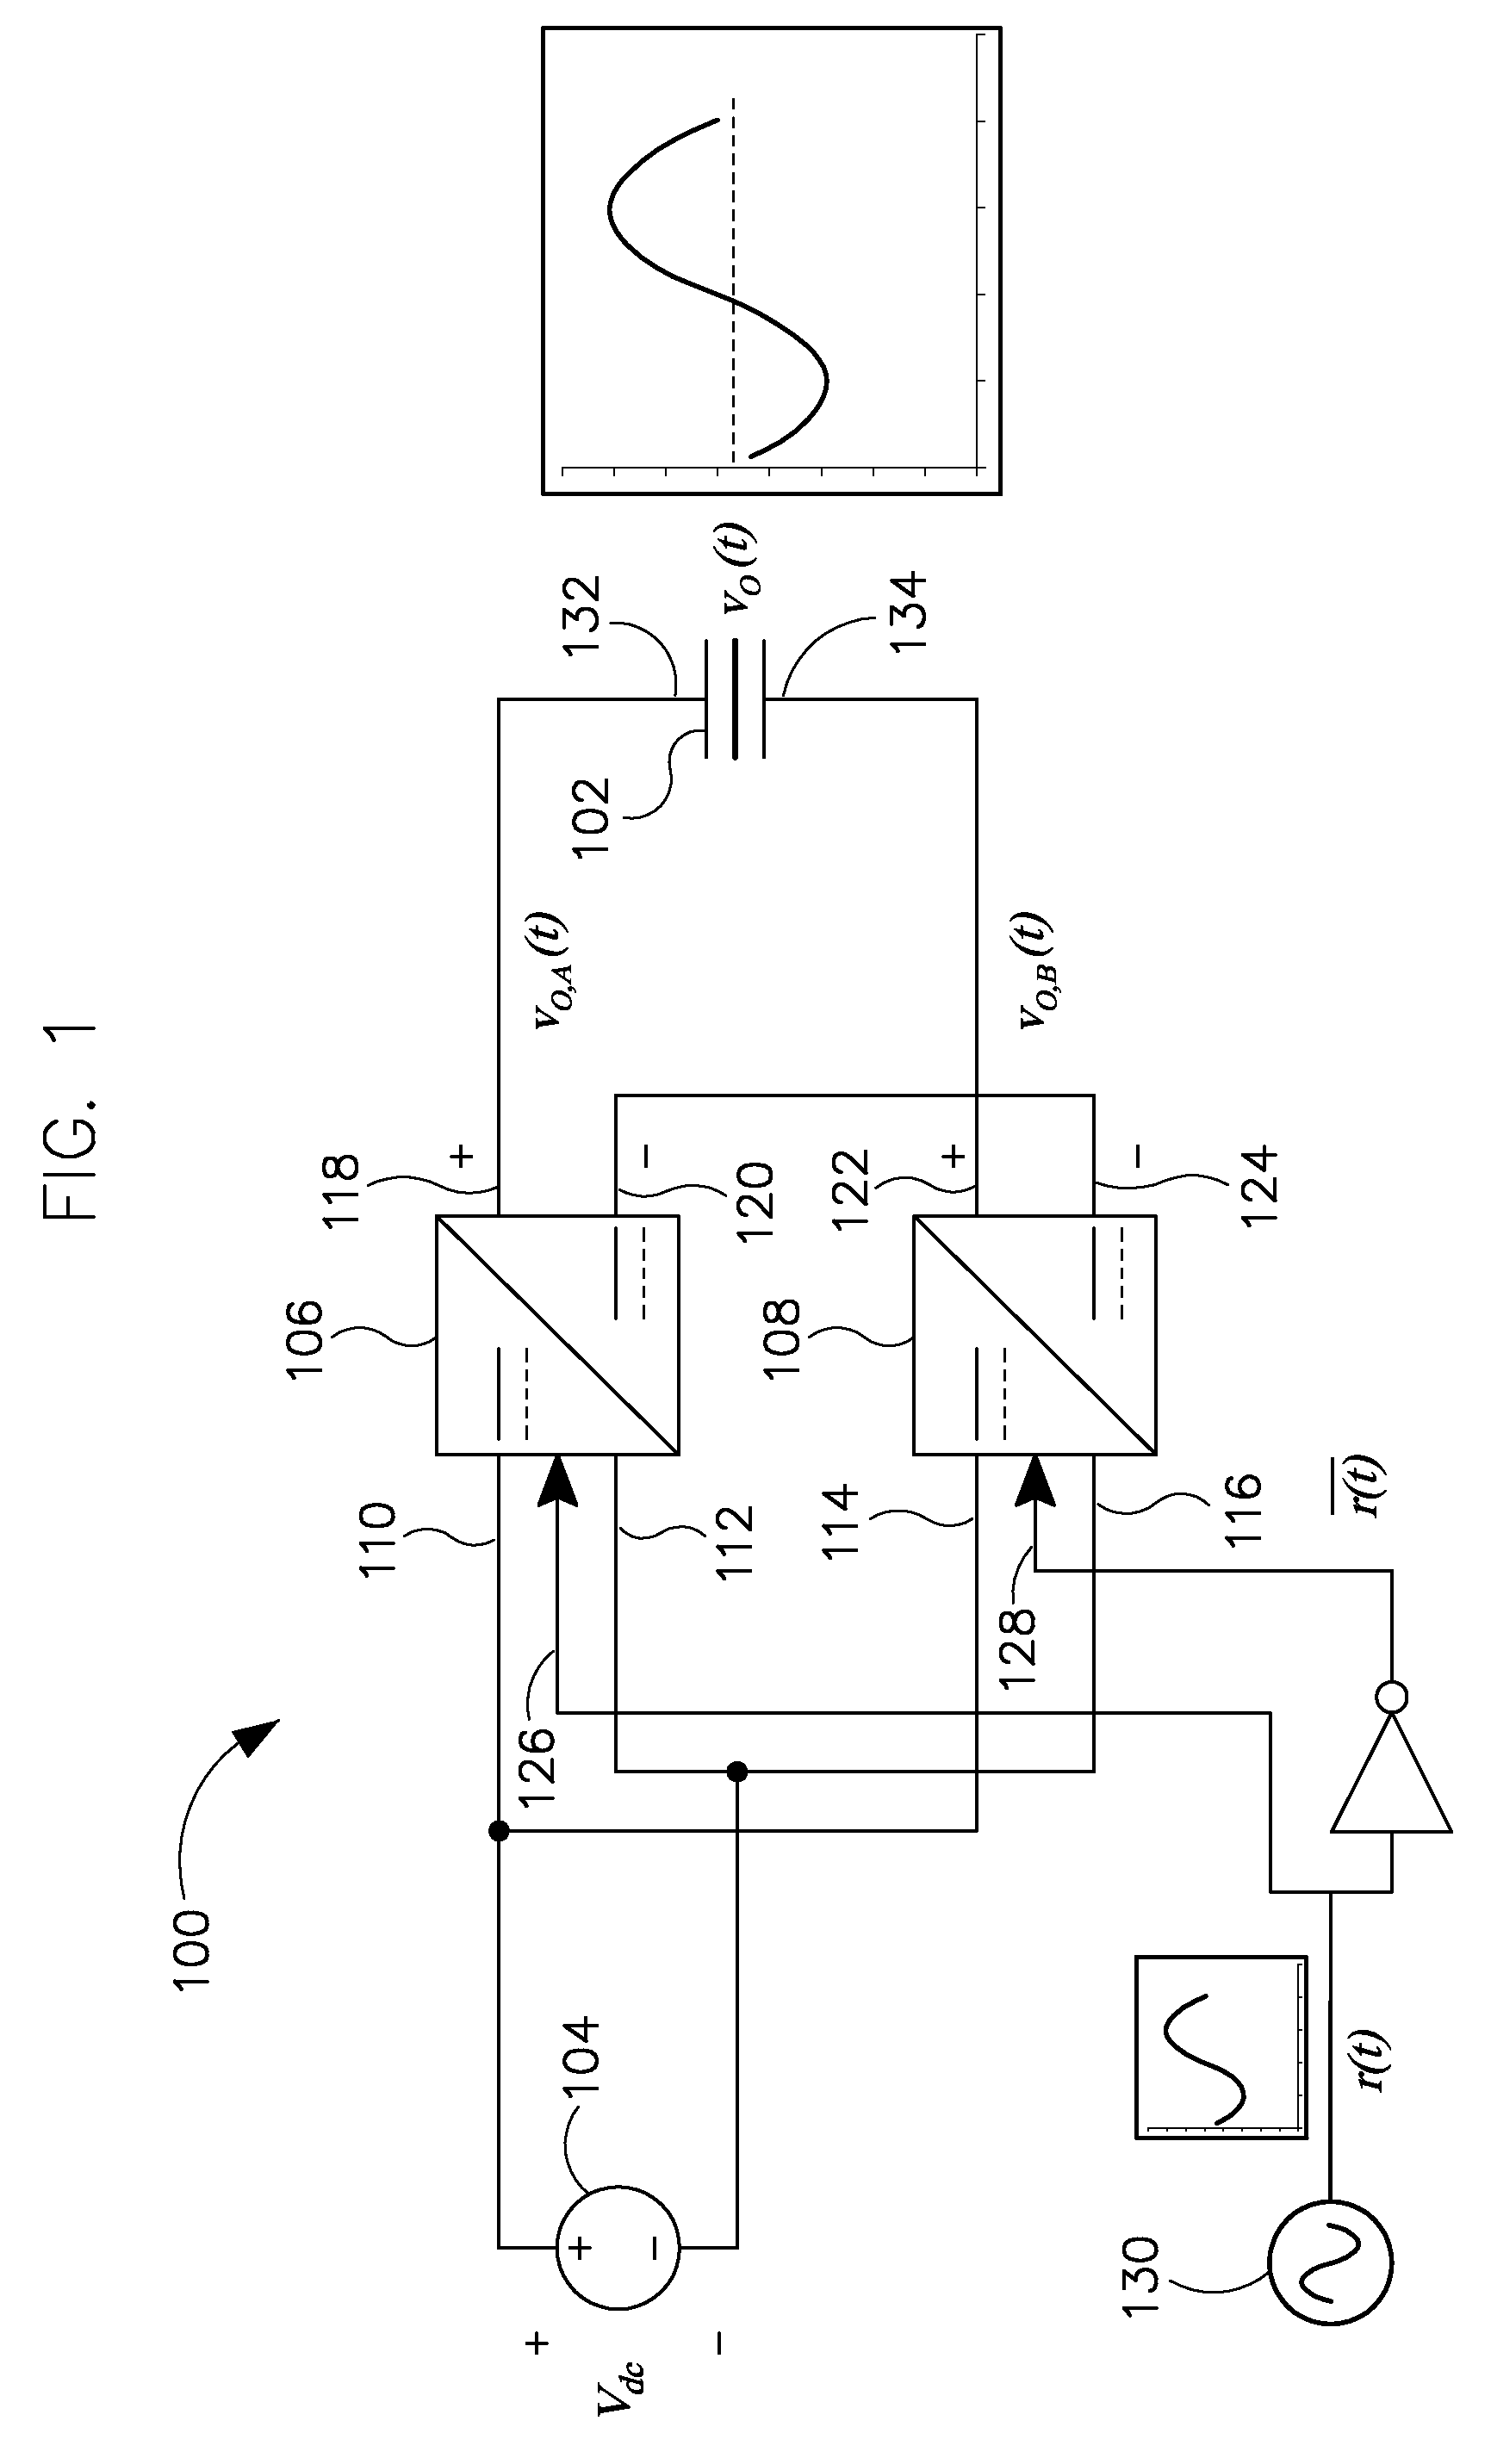 System for driving a piezoelectric load and method of making same